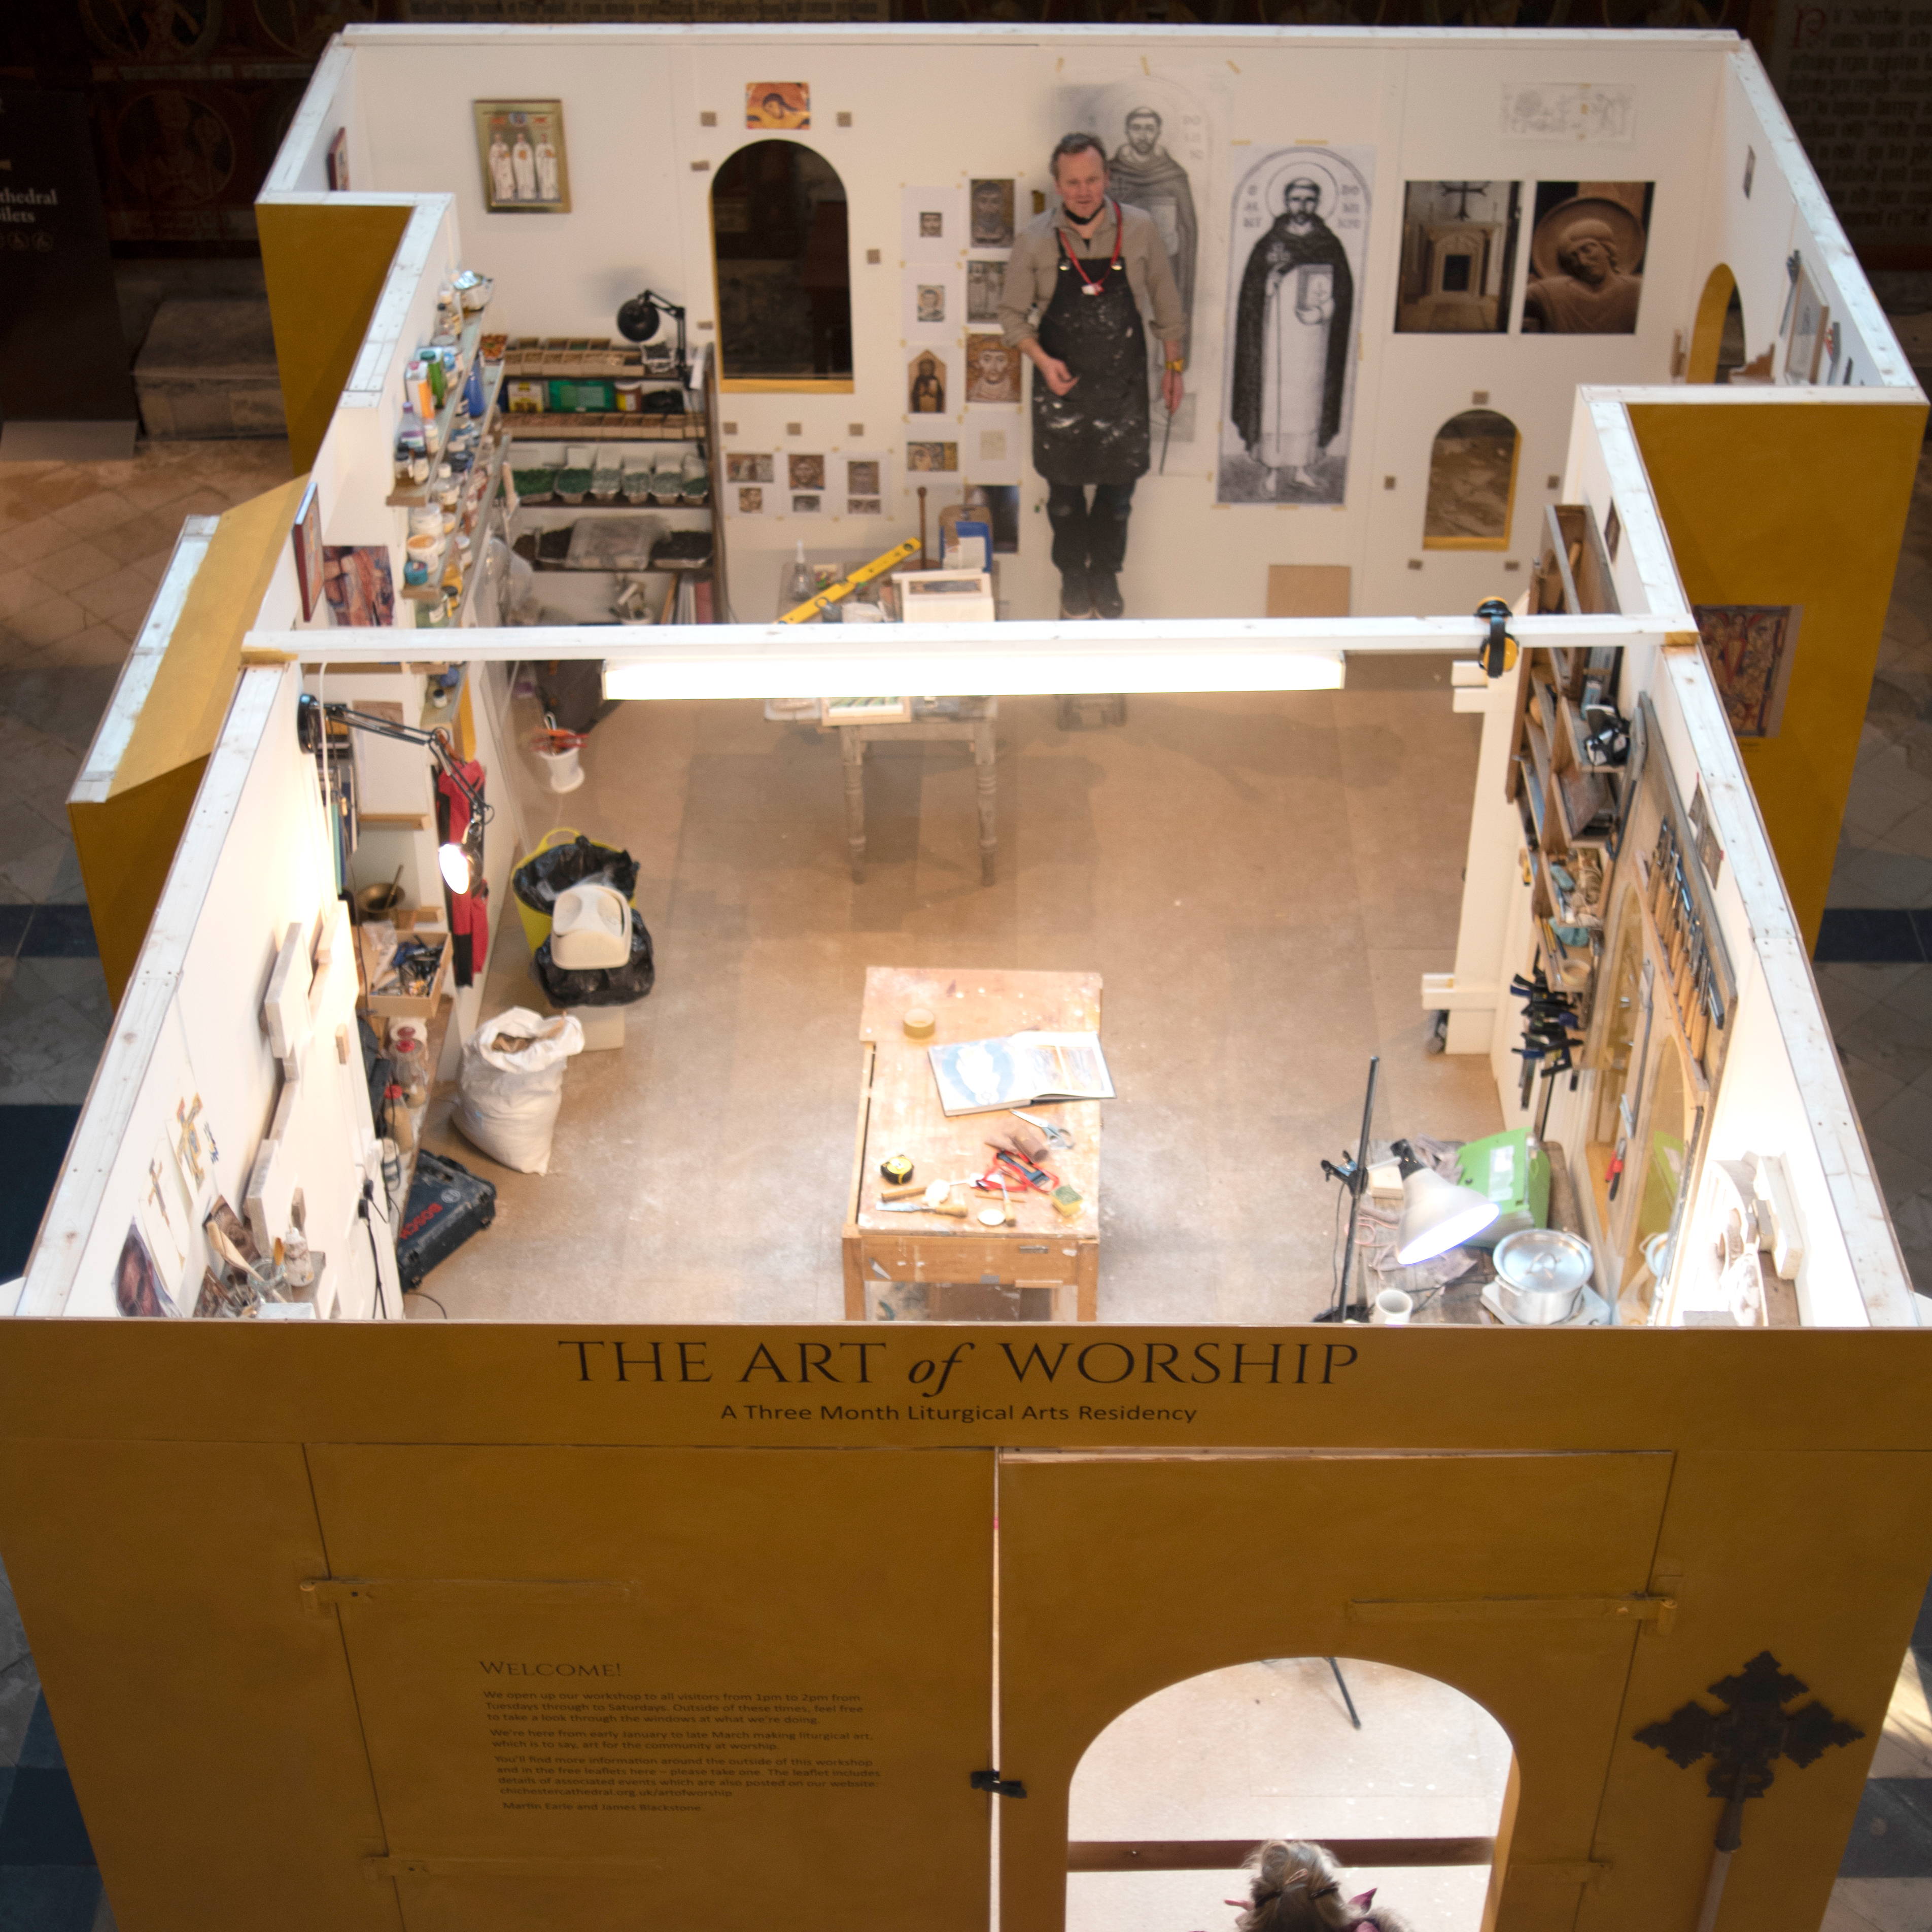 The studio from a birds-eye view